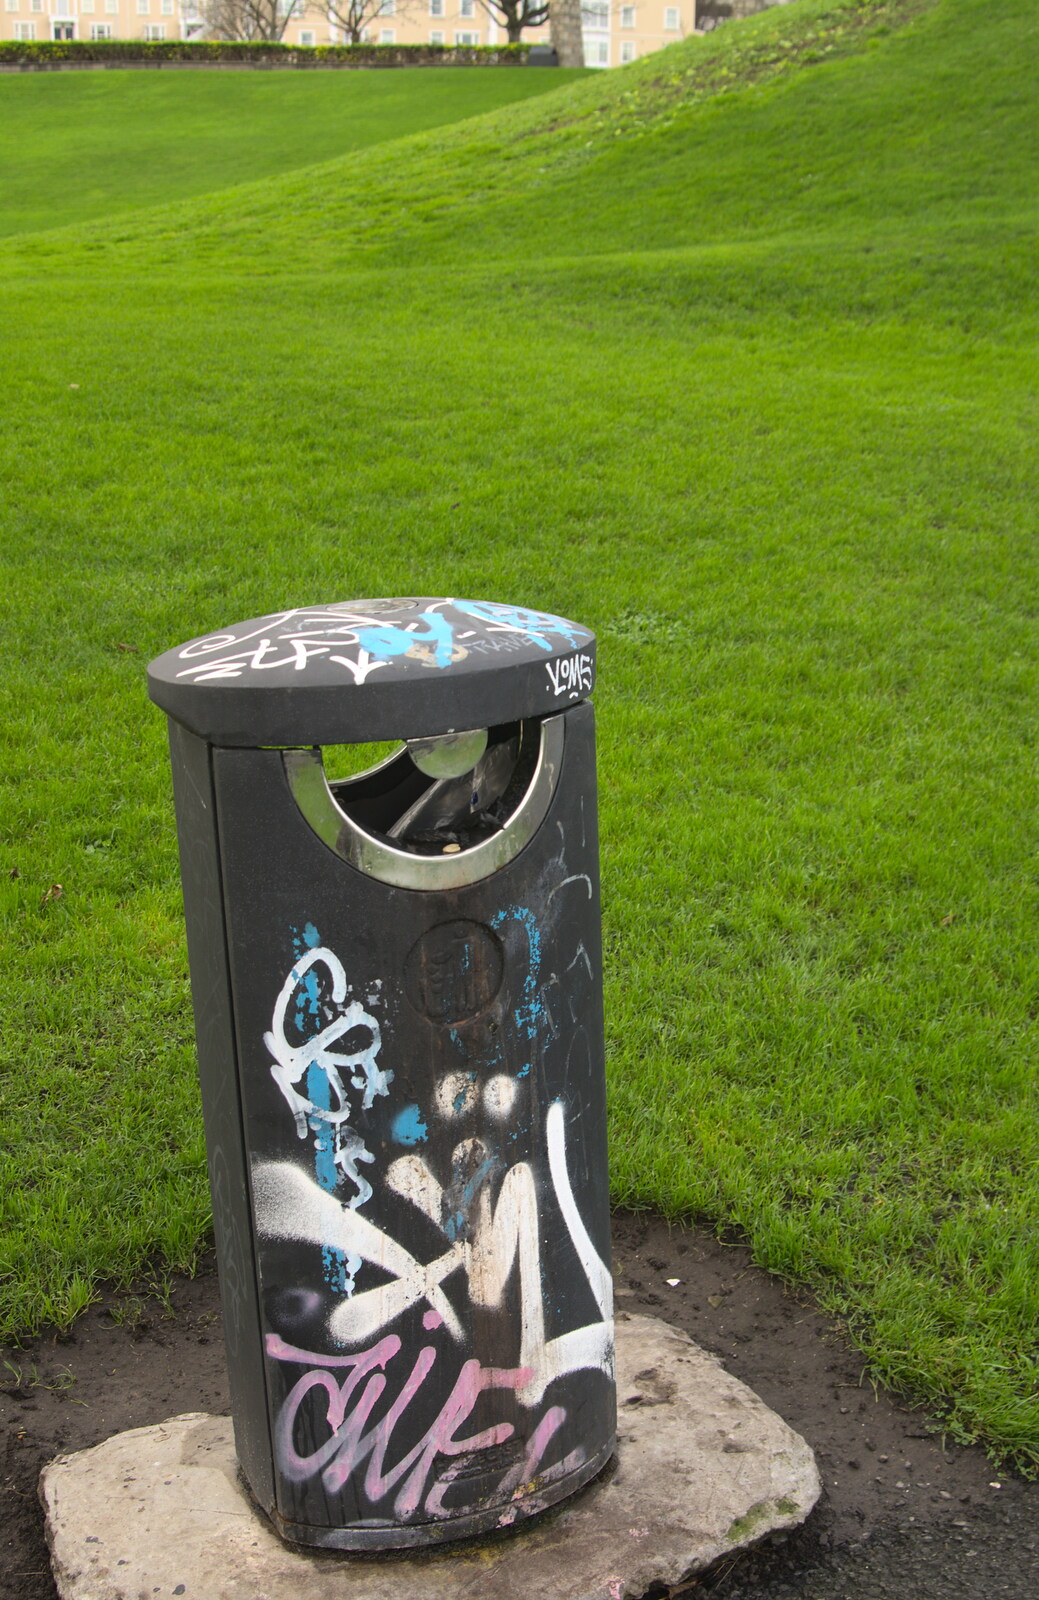 A graffiti bin from Conwy, Holyhead and the Ferry to Ireland - 21st December 2015